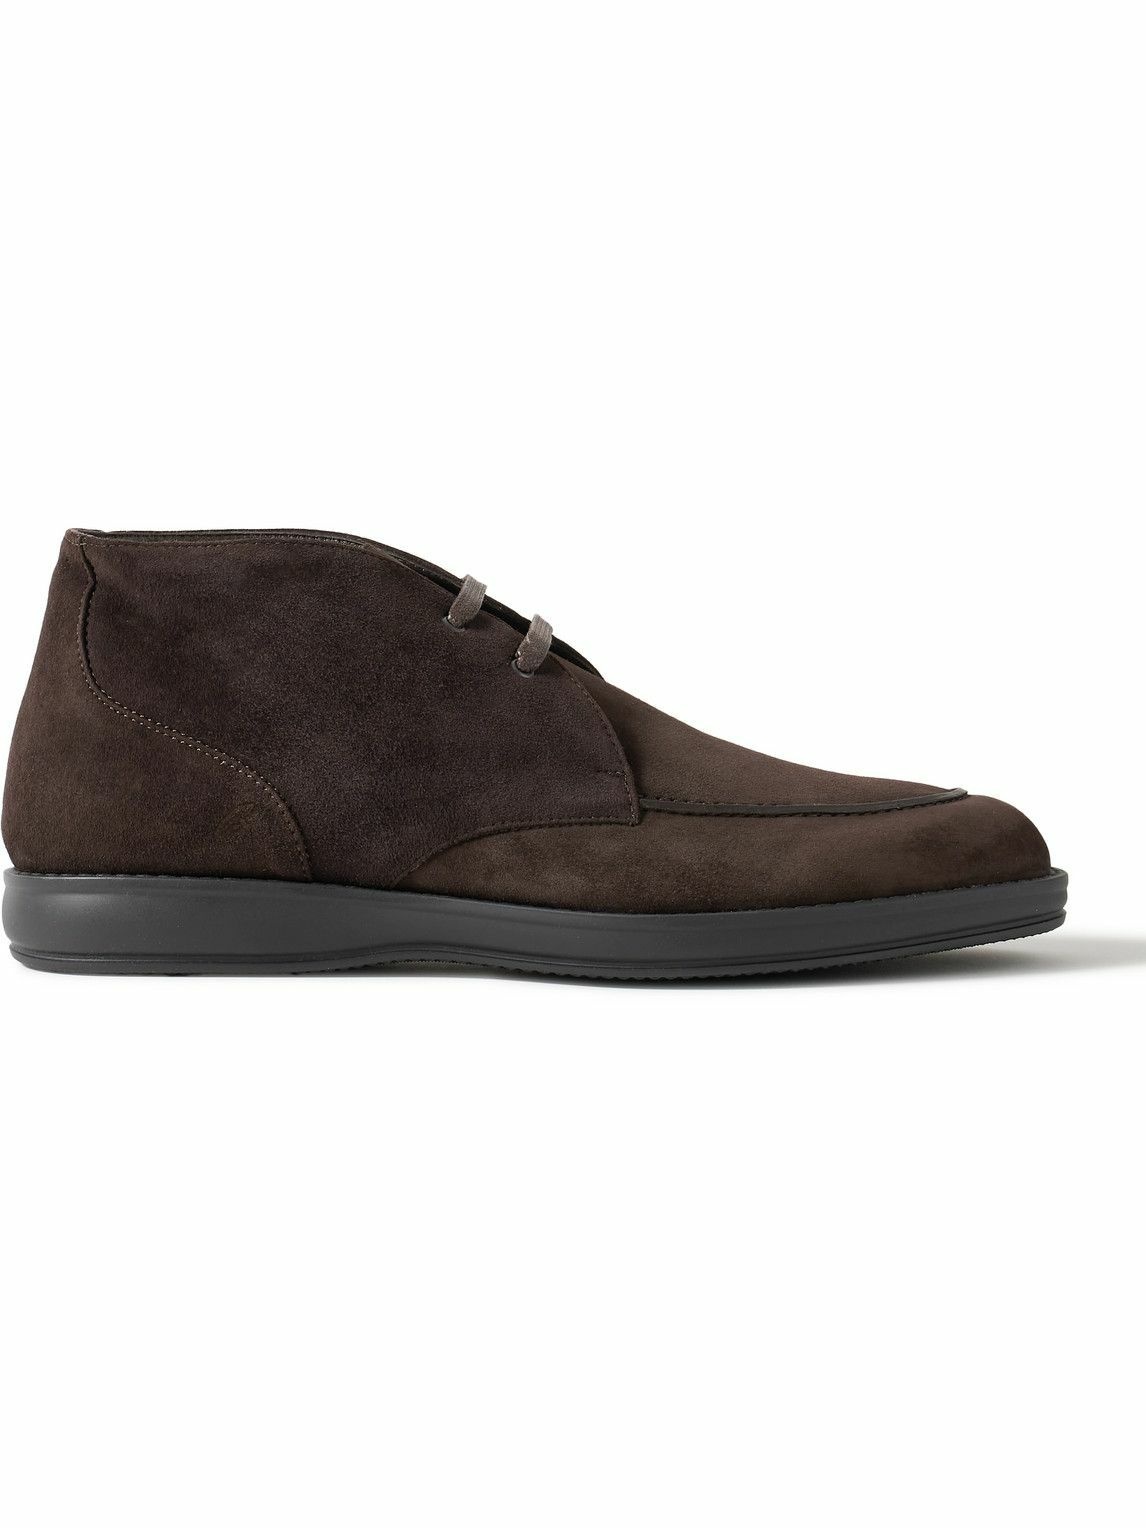 Photo: Brioni - York Leather-Trimmed Suede Chukka Boots - Brown